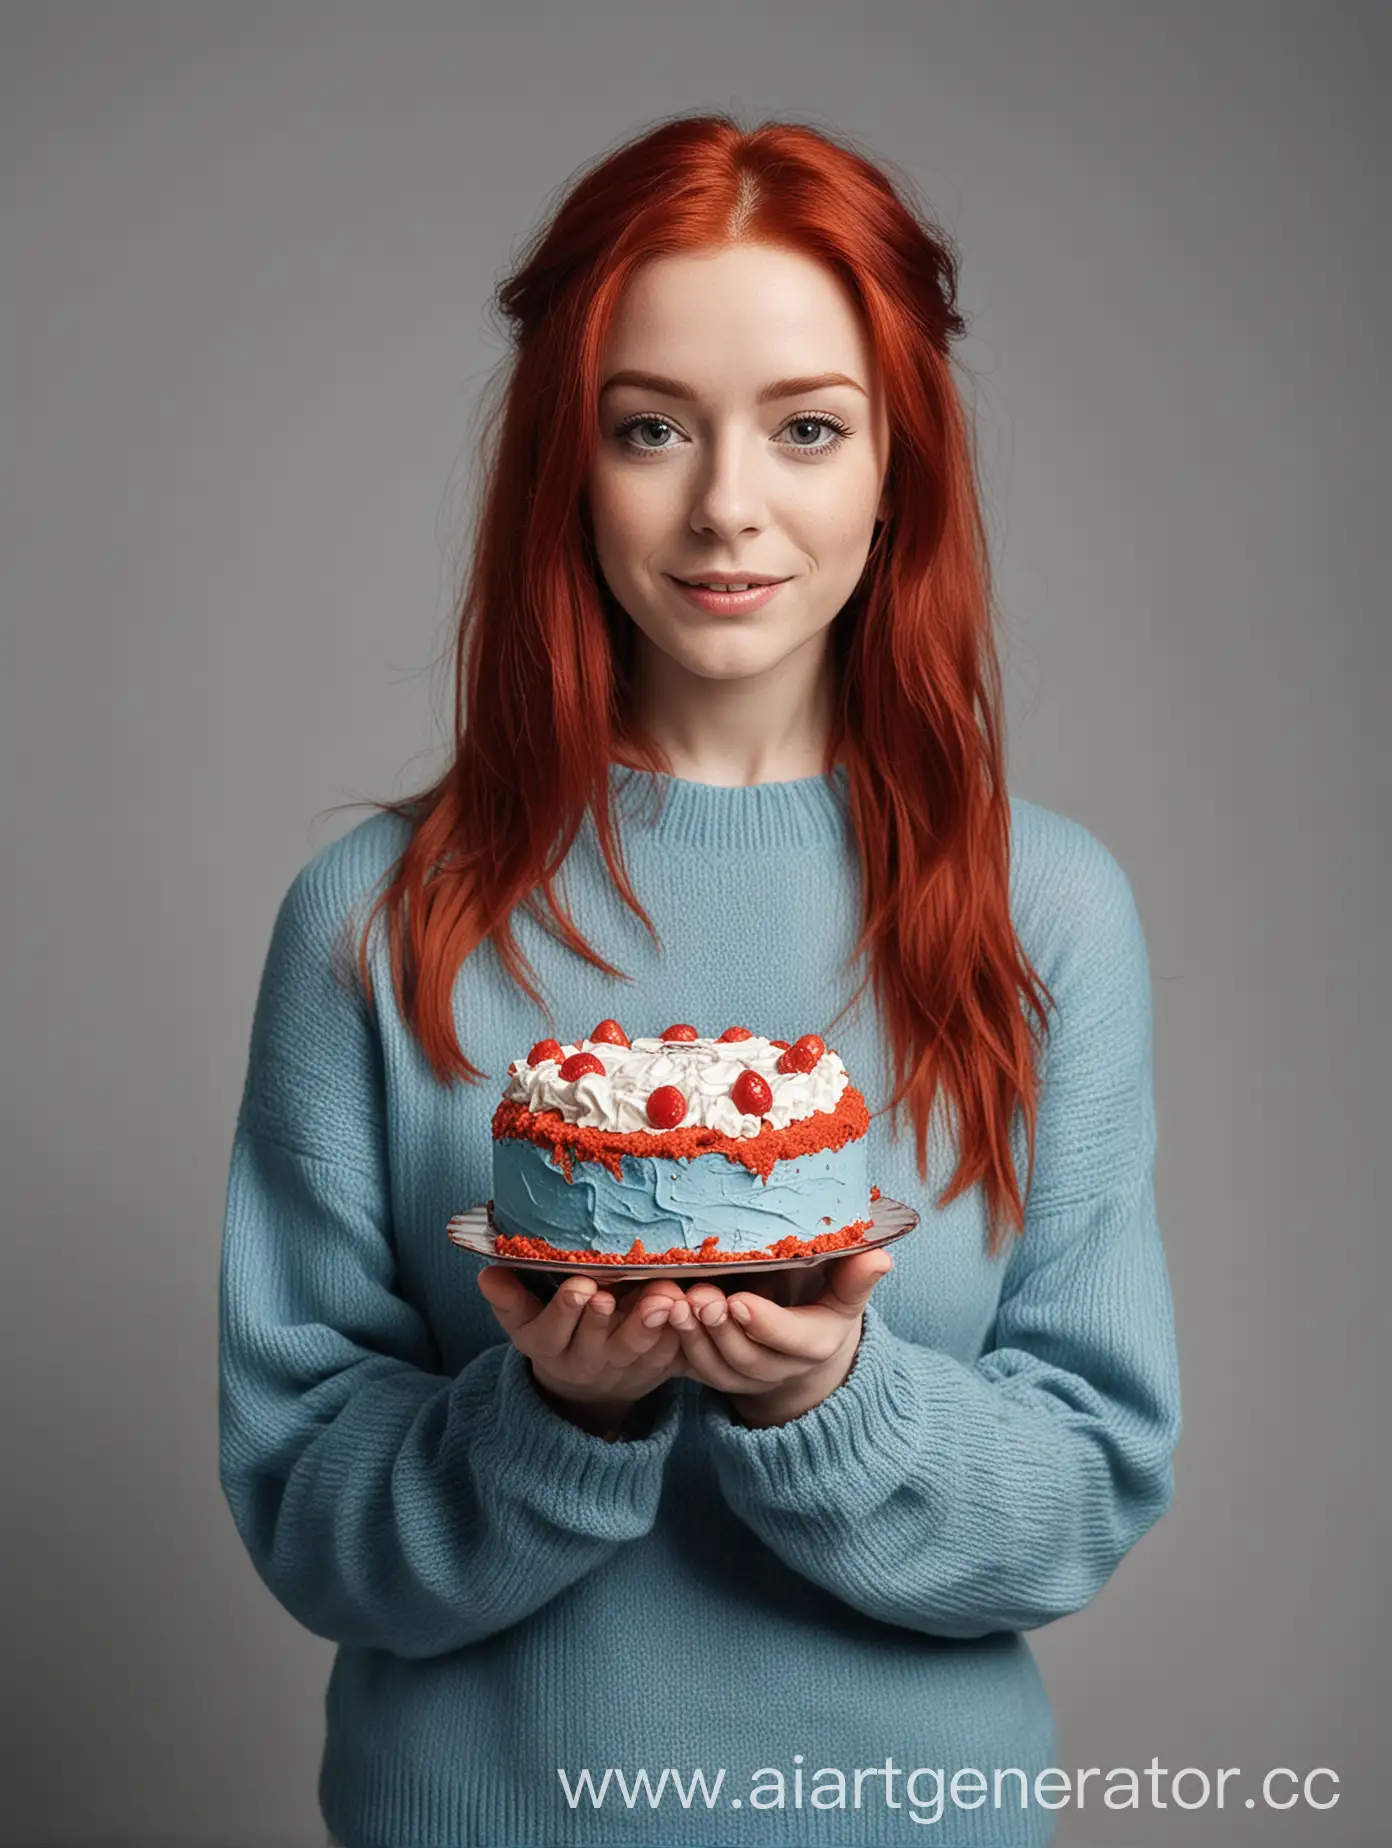 Person-with-Red-Hair-Holding-Minimalist-Cake-in-Blue-Sweater